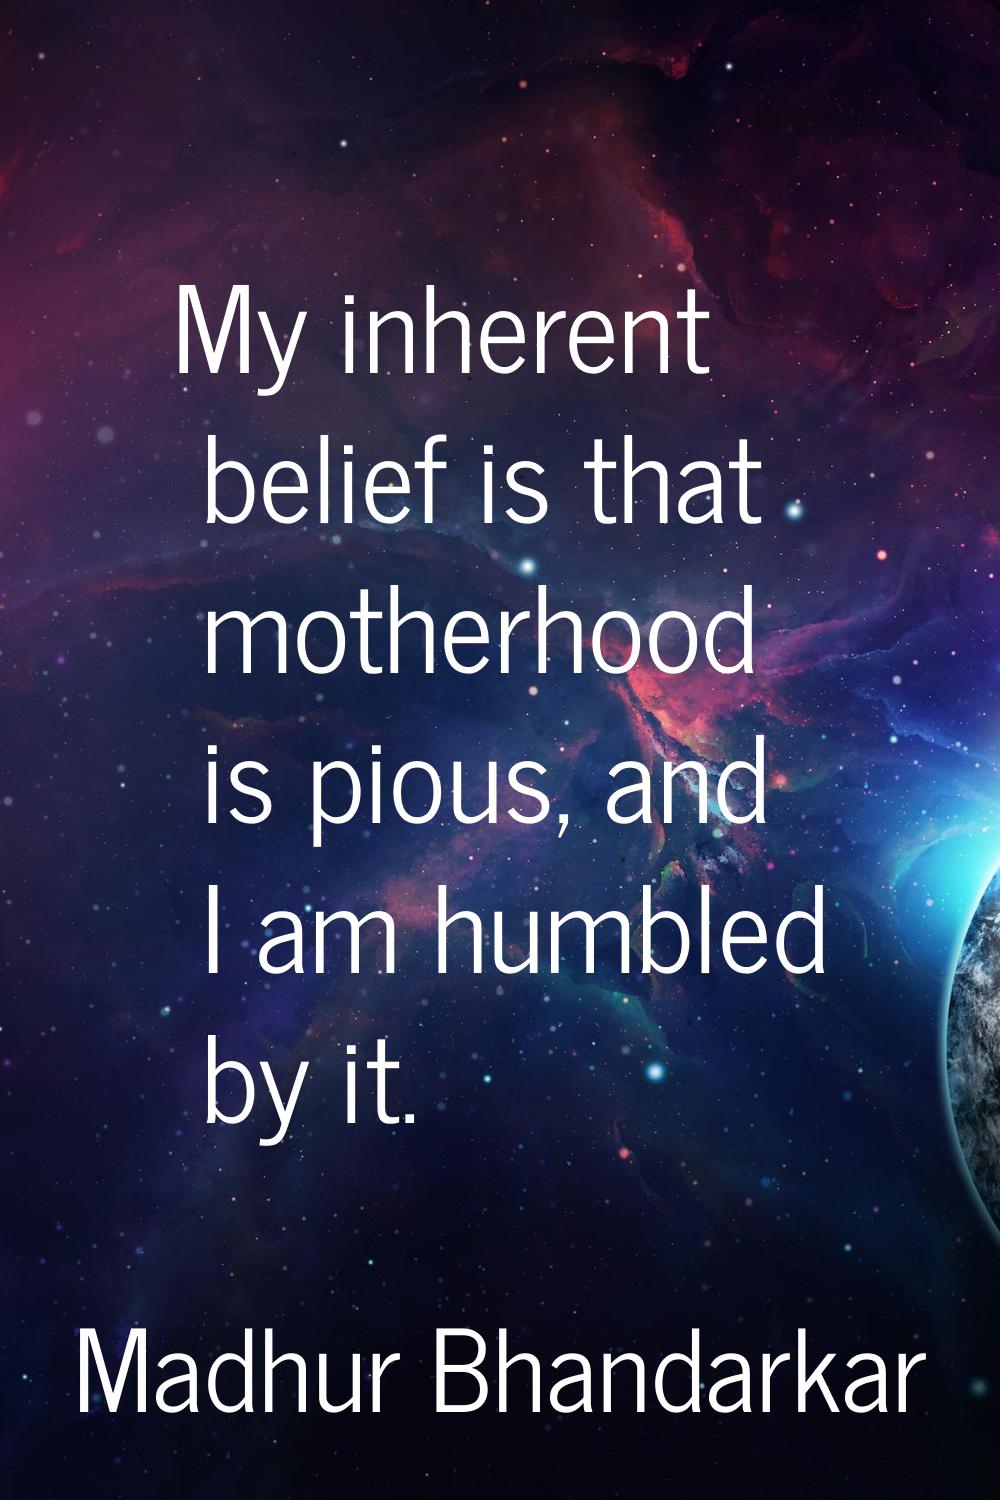 My inherent belief is that motherhood is pious, and I am humbled by it.